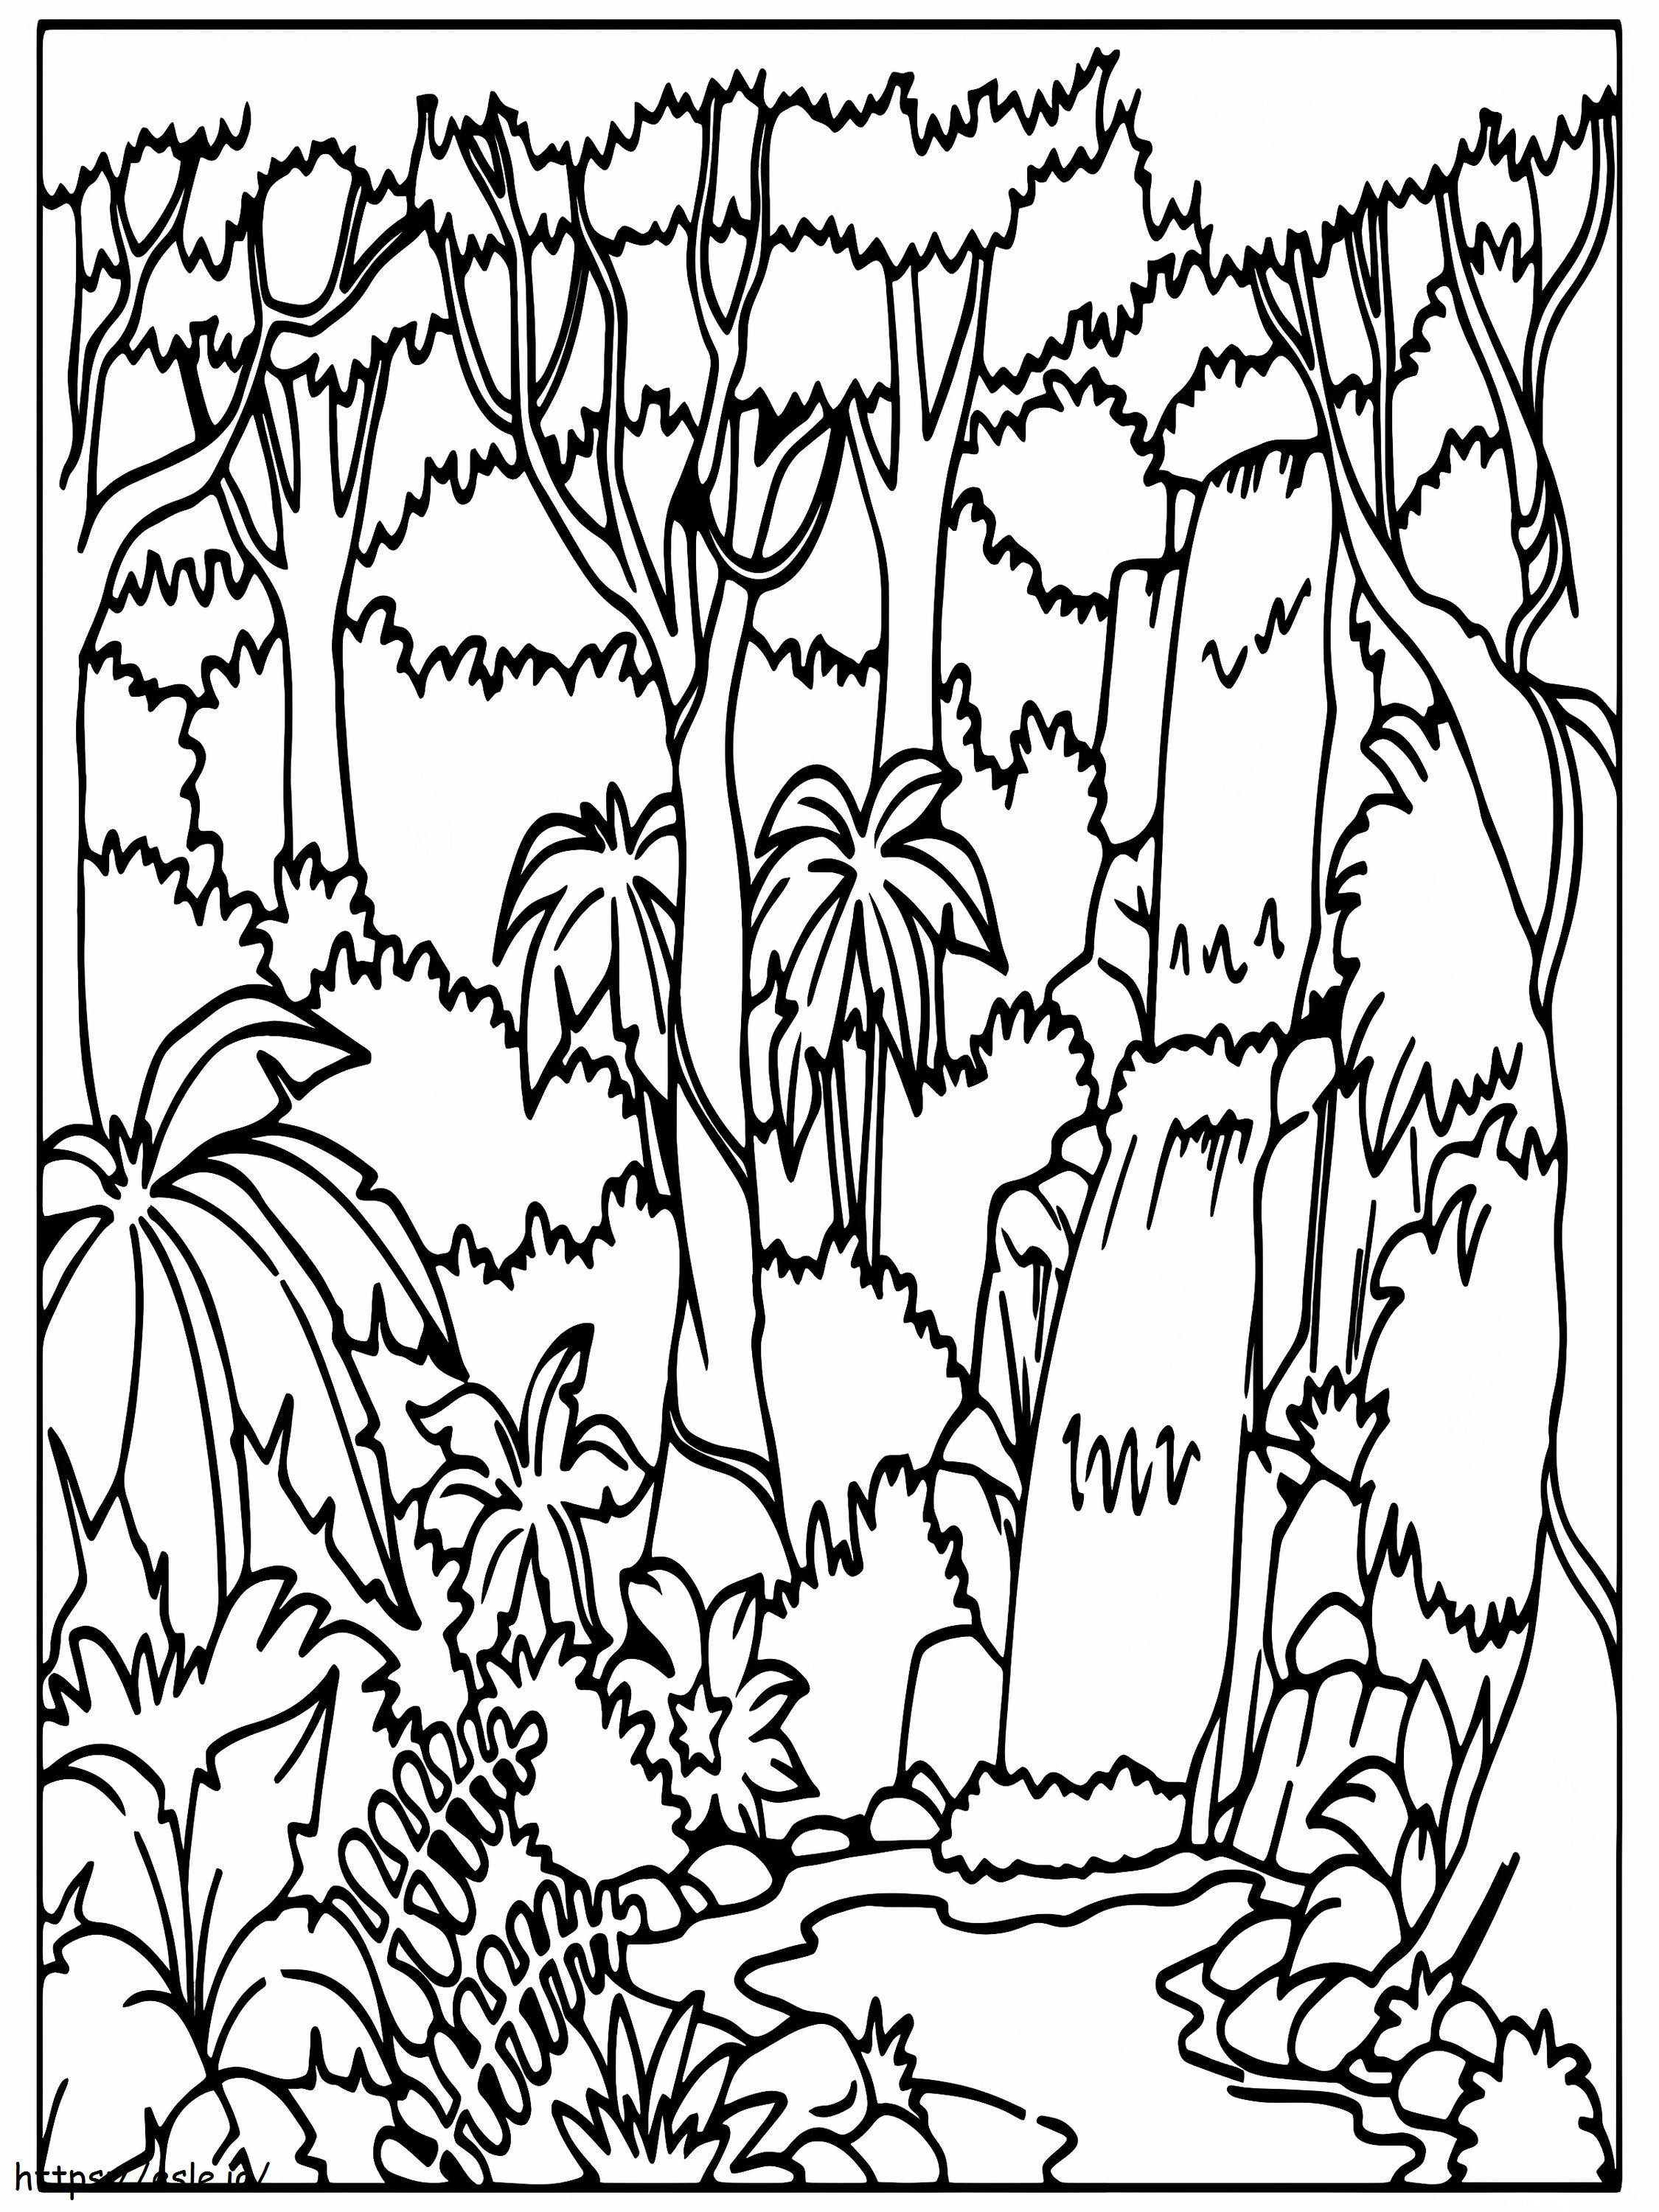 Wonderful Forest coloring page